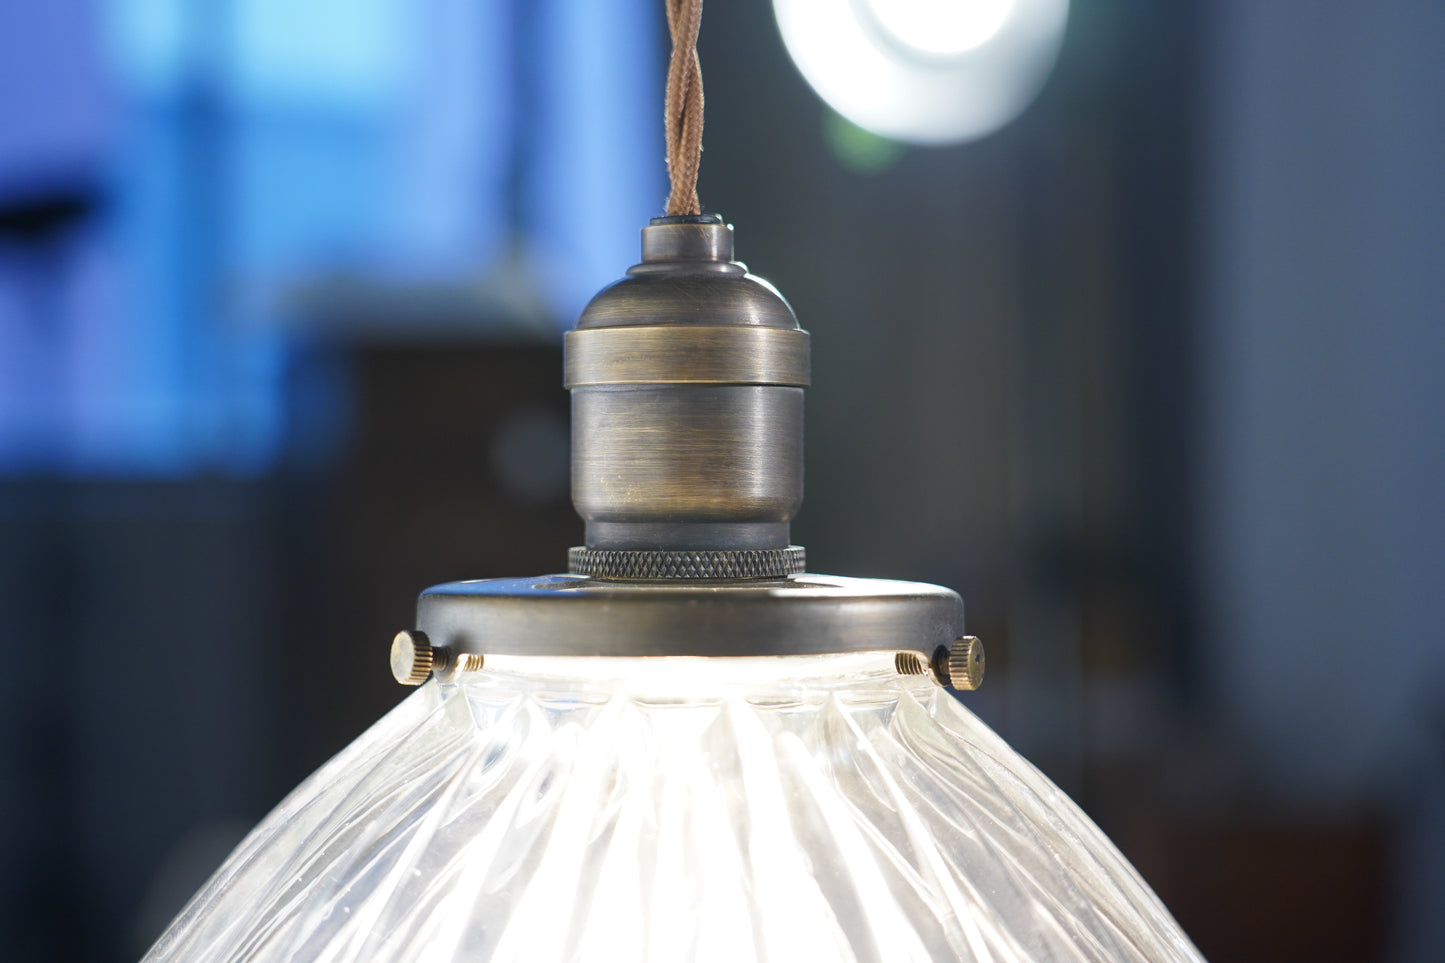 Wave Glam - Vintage Industrial Brass and Glass Pendant Lighting